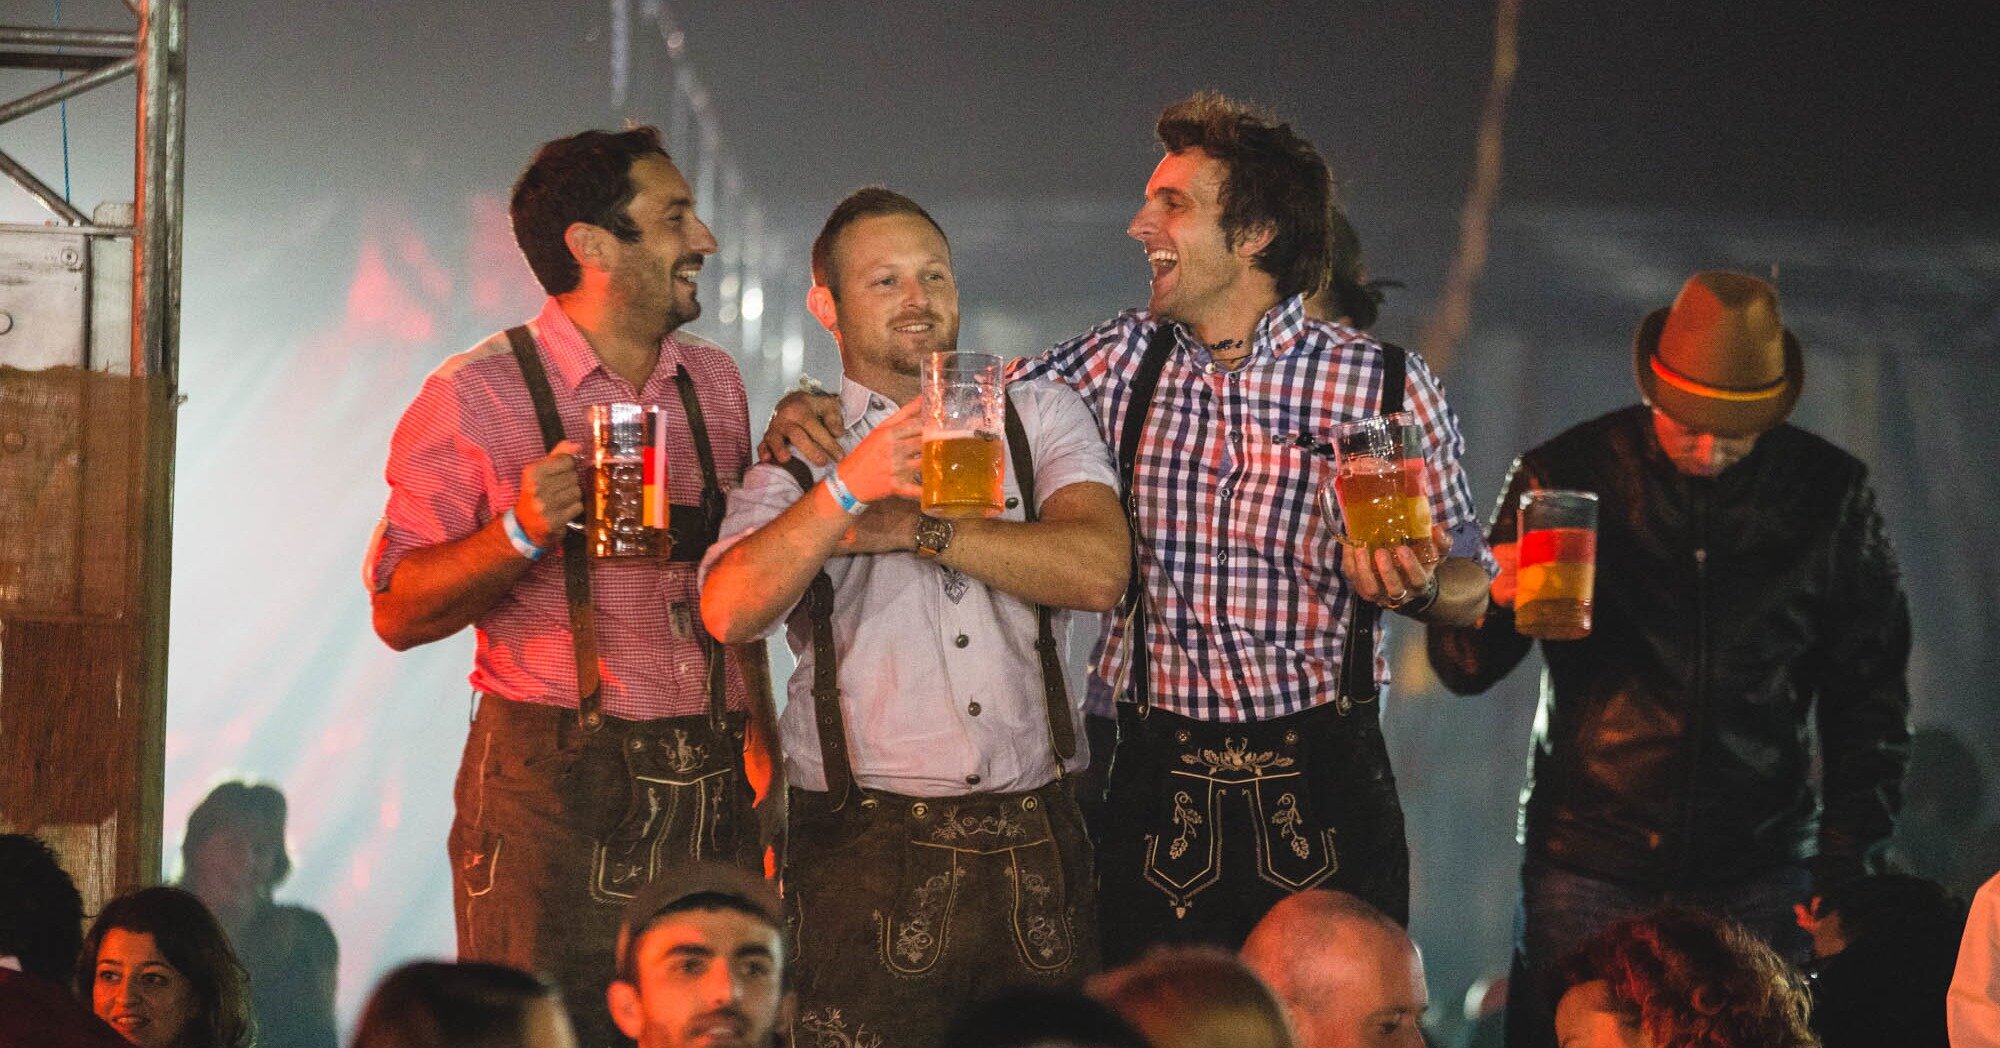 Don't those lederhosens' look splendid! 🤩

Remember we hold a best dressed competition on the day - wear your best Bavarian inspired outfit and join in on the festivities for a chance to win a gift! 🎁

📍 UK 2023 TOUR LOCATIONS - CHELMSFORD - COLCH